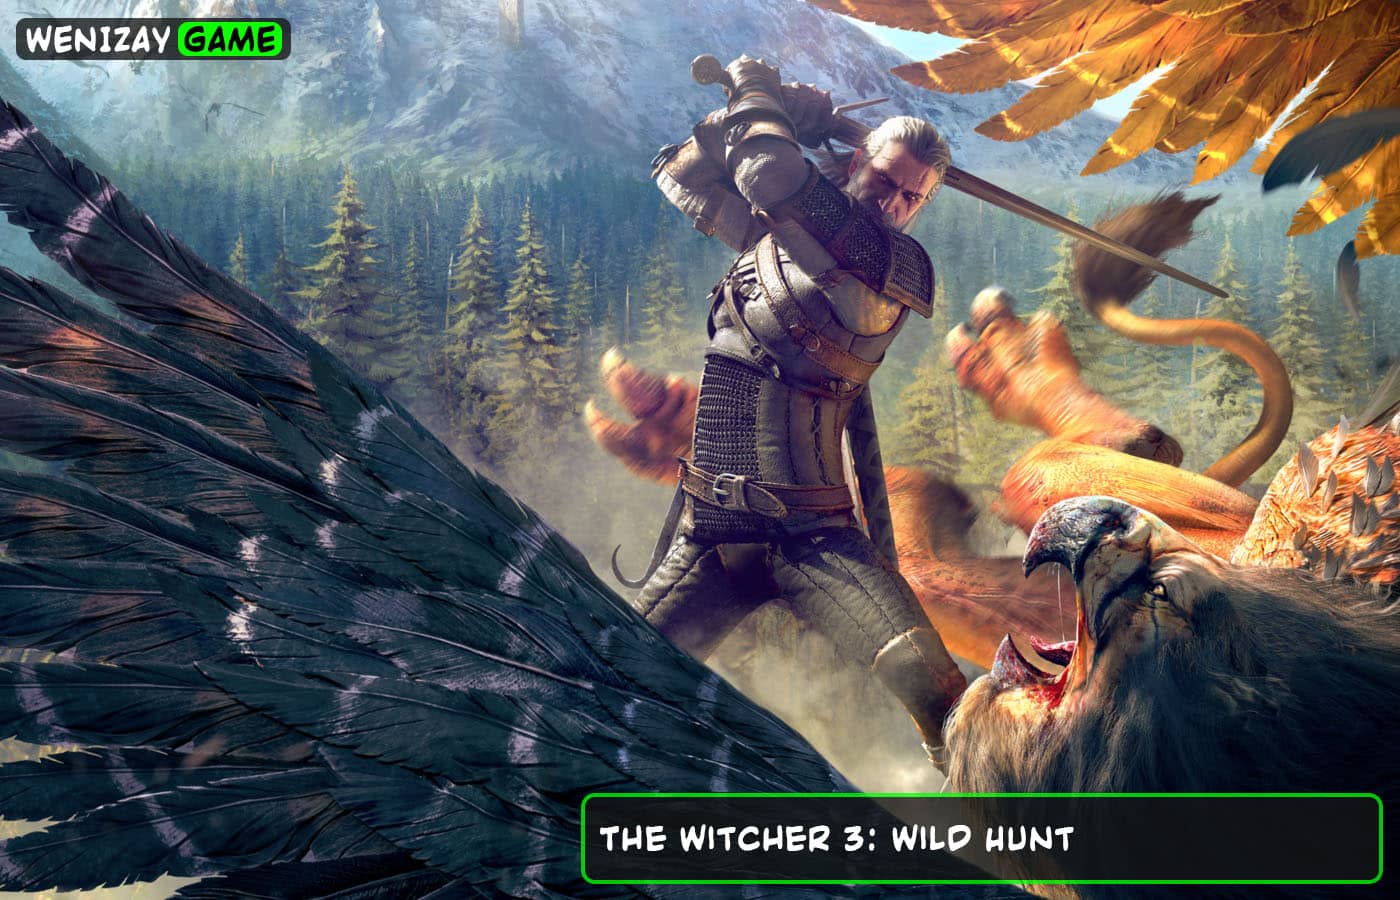 The Witcher 3 (CD Projekt RED)